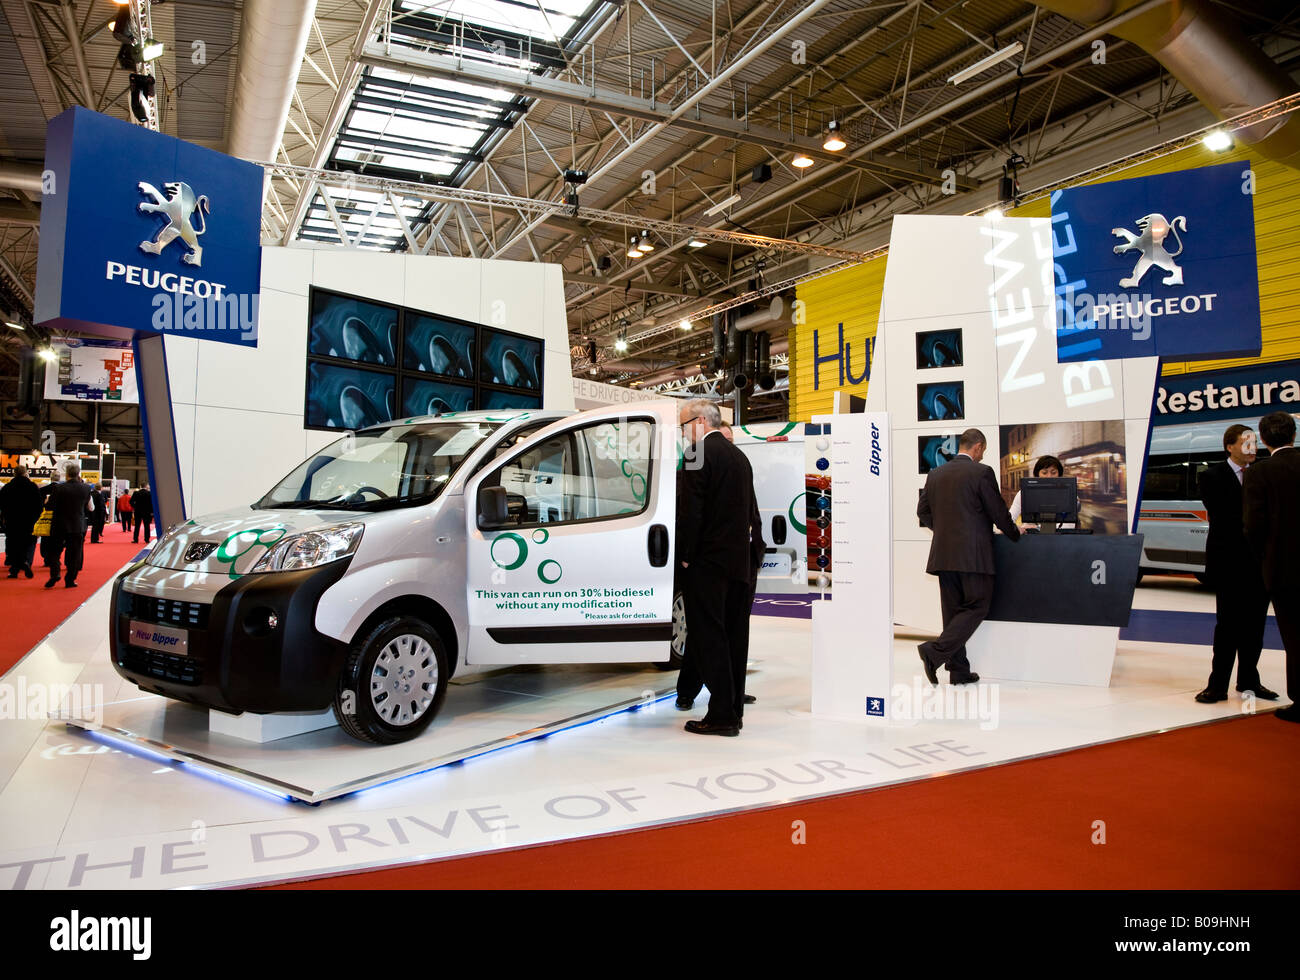 The 2008 Peugeot Bipper compact van on display at the Commercial Vehicle Show, Birmingham NEC, UK. Stock Photo